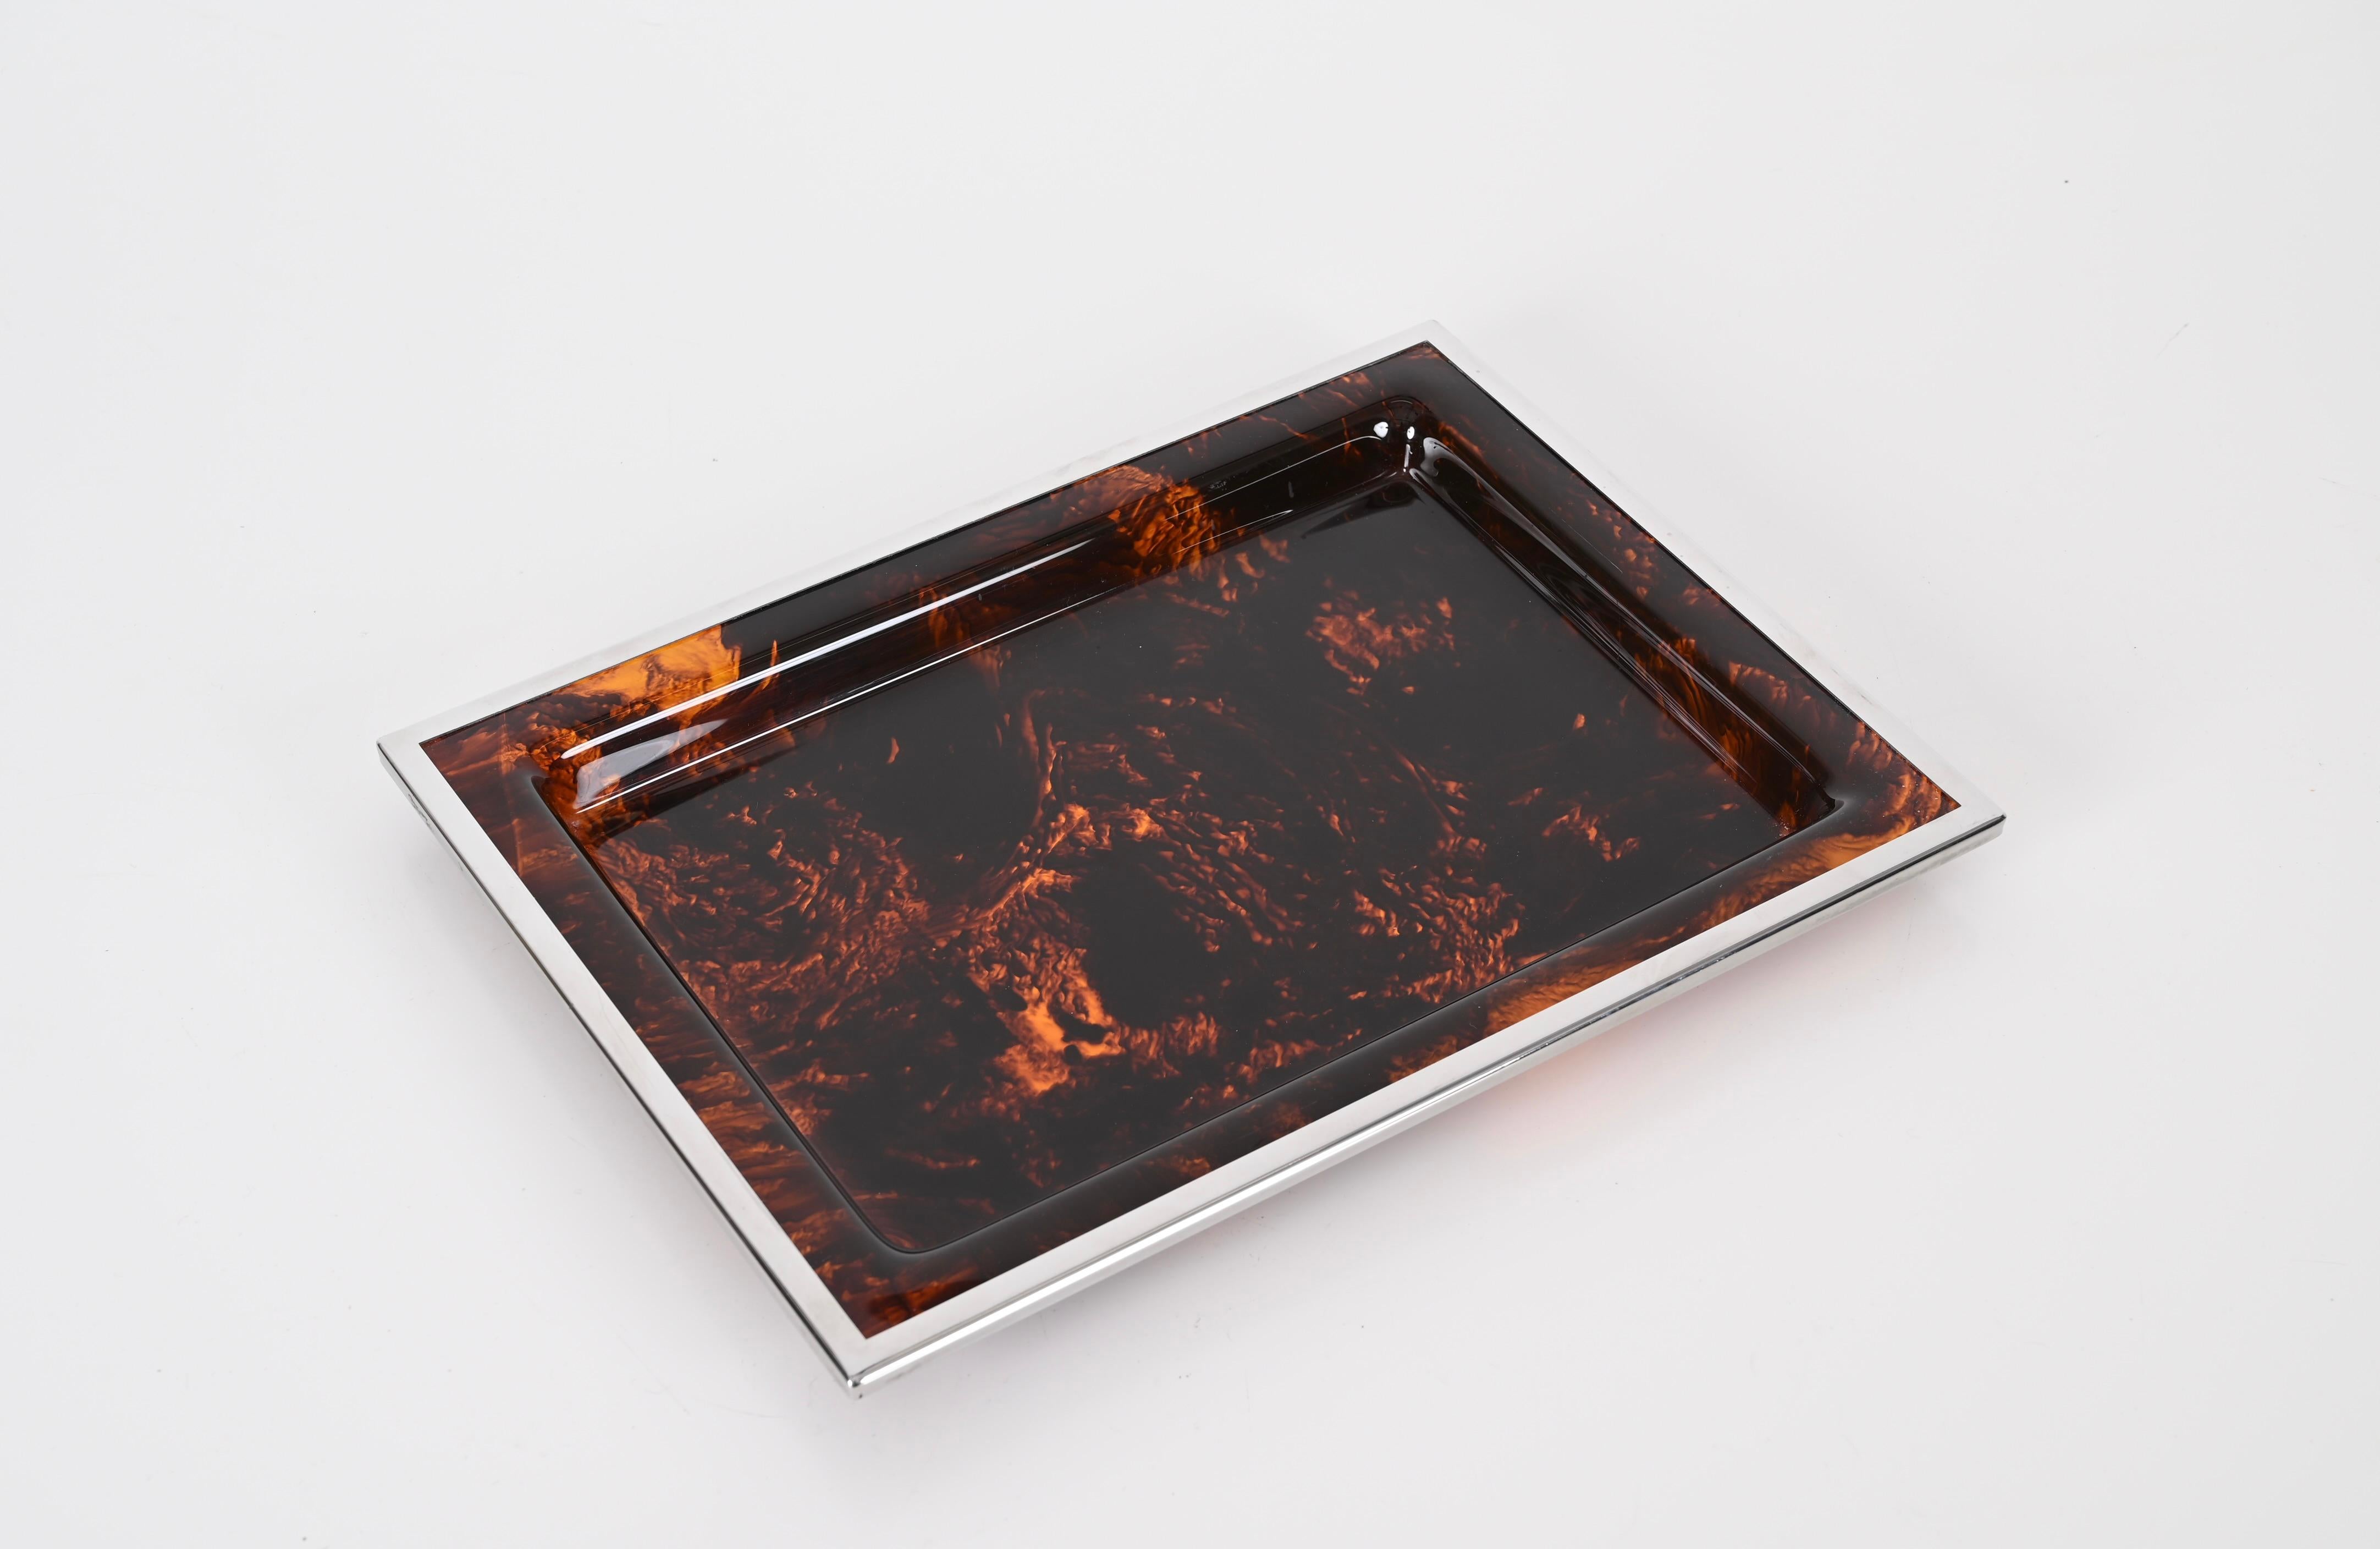 Christian Dior Tortoiseshell Effect Lucite and Chrome Serving Tray, Italy 1970s For Sale 5